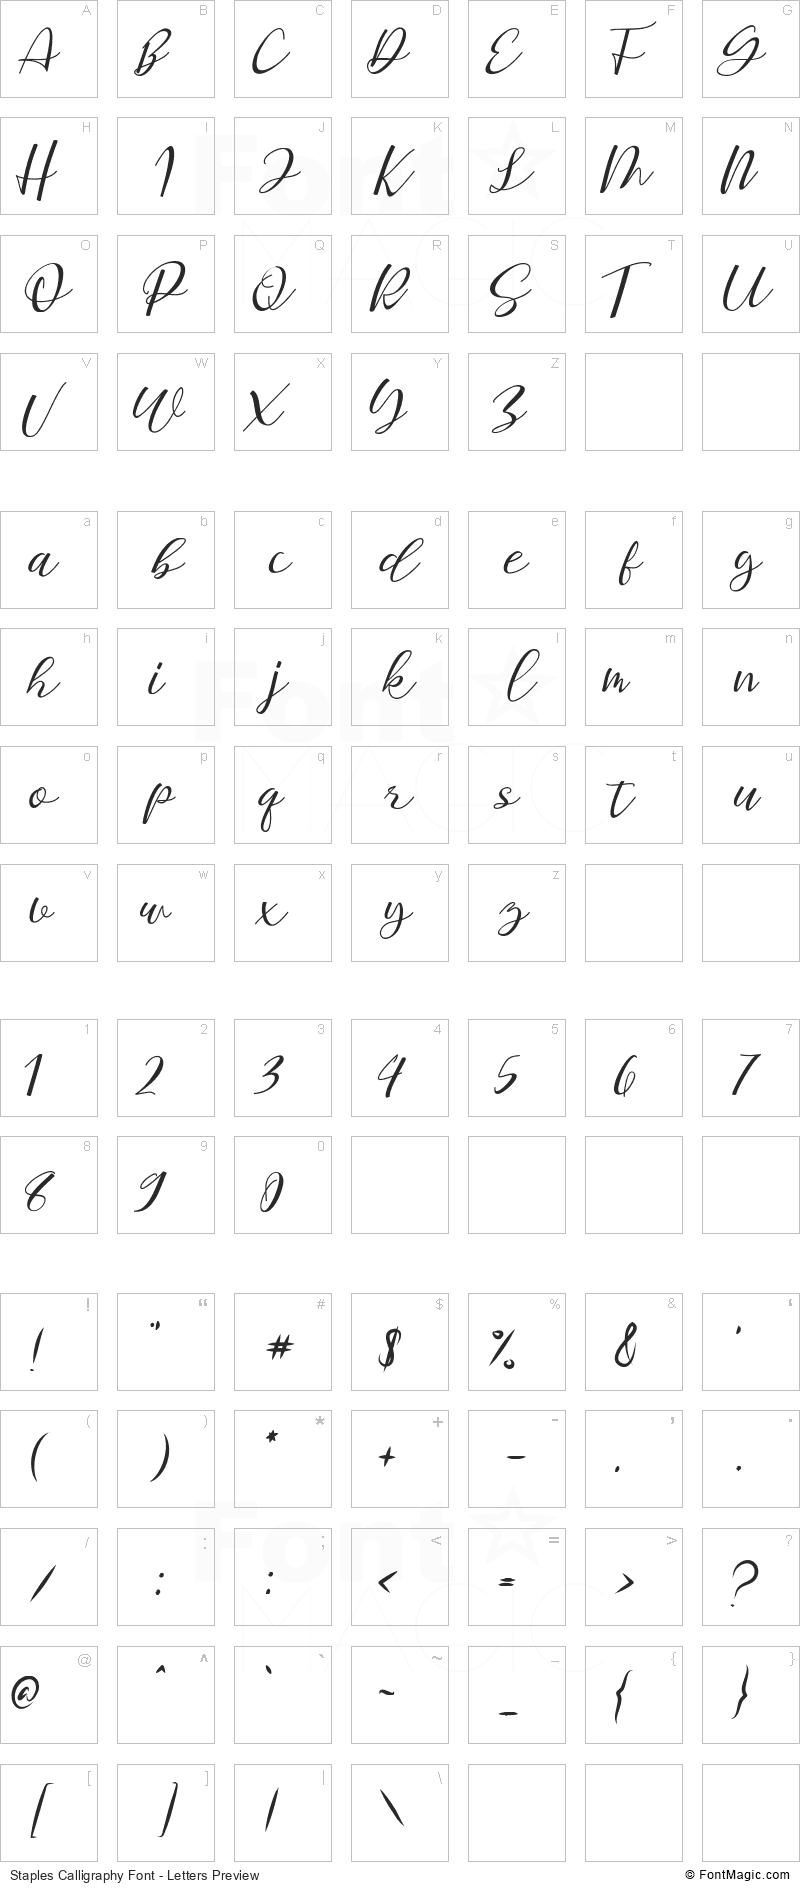 Staples Calligraphy Font - All Latters Preview Chart